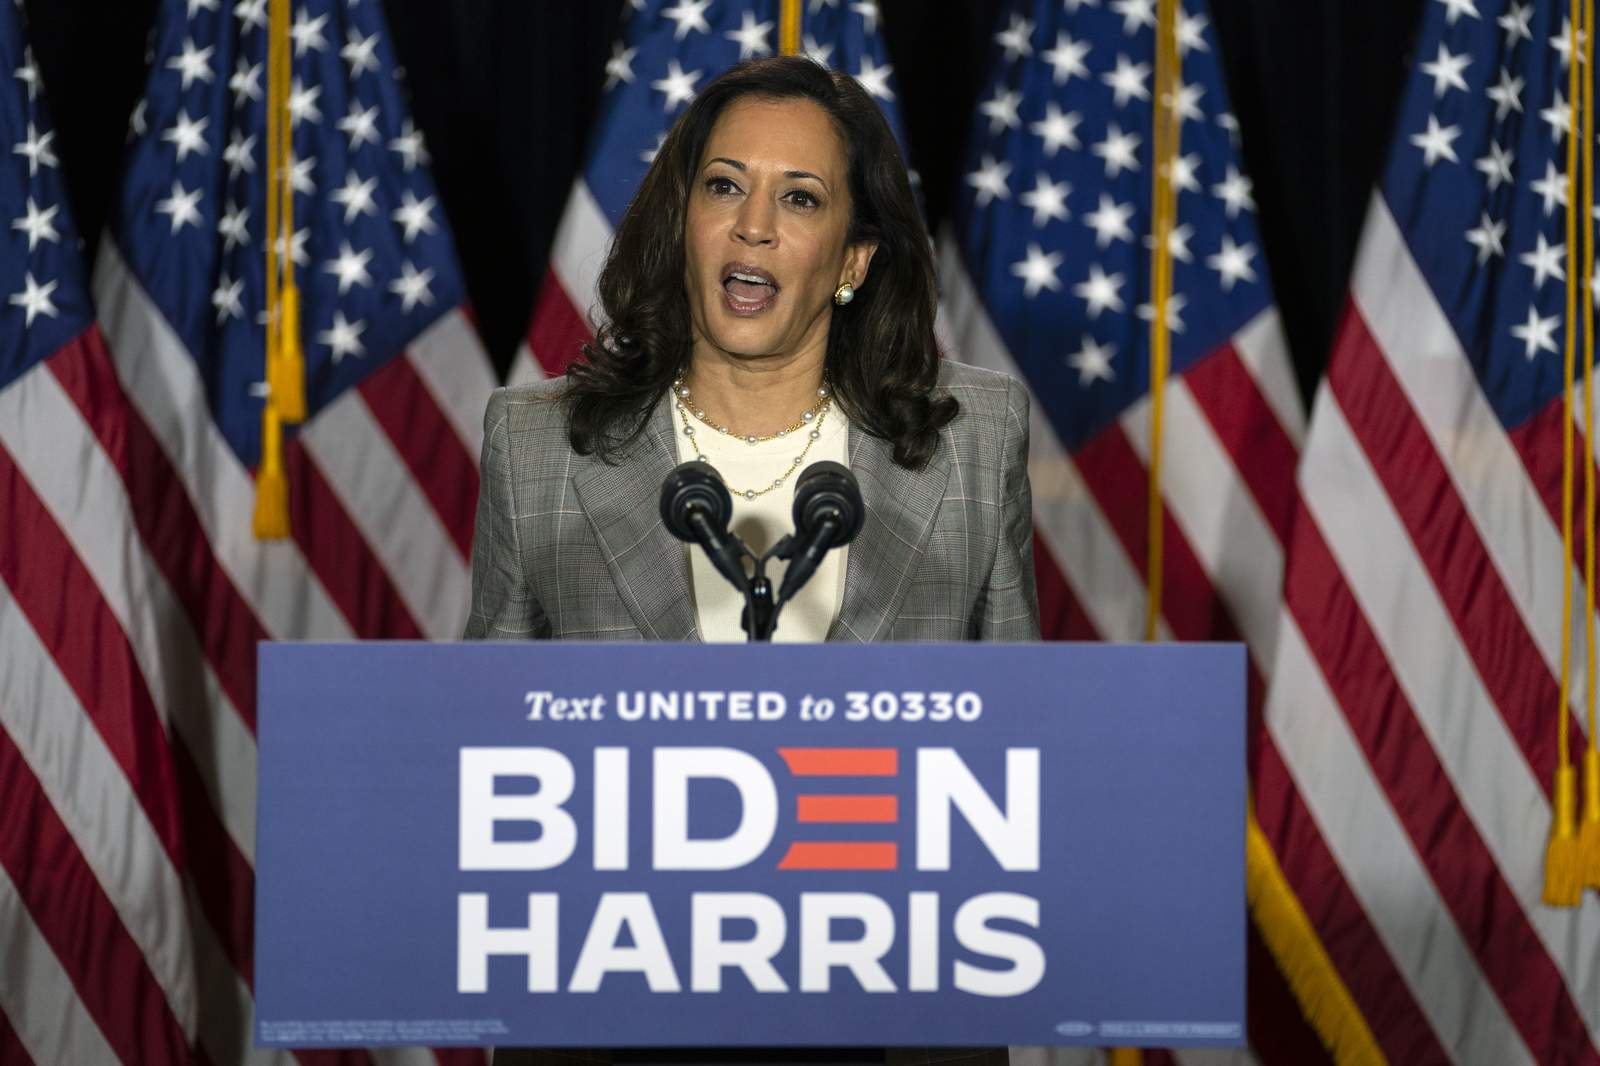 Harris bringing energy, dollars and more to Biden's campaign